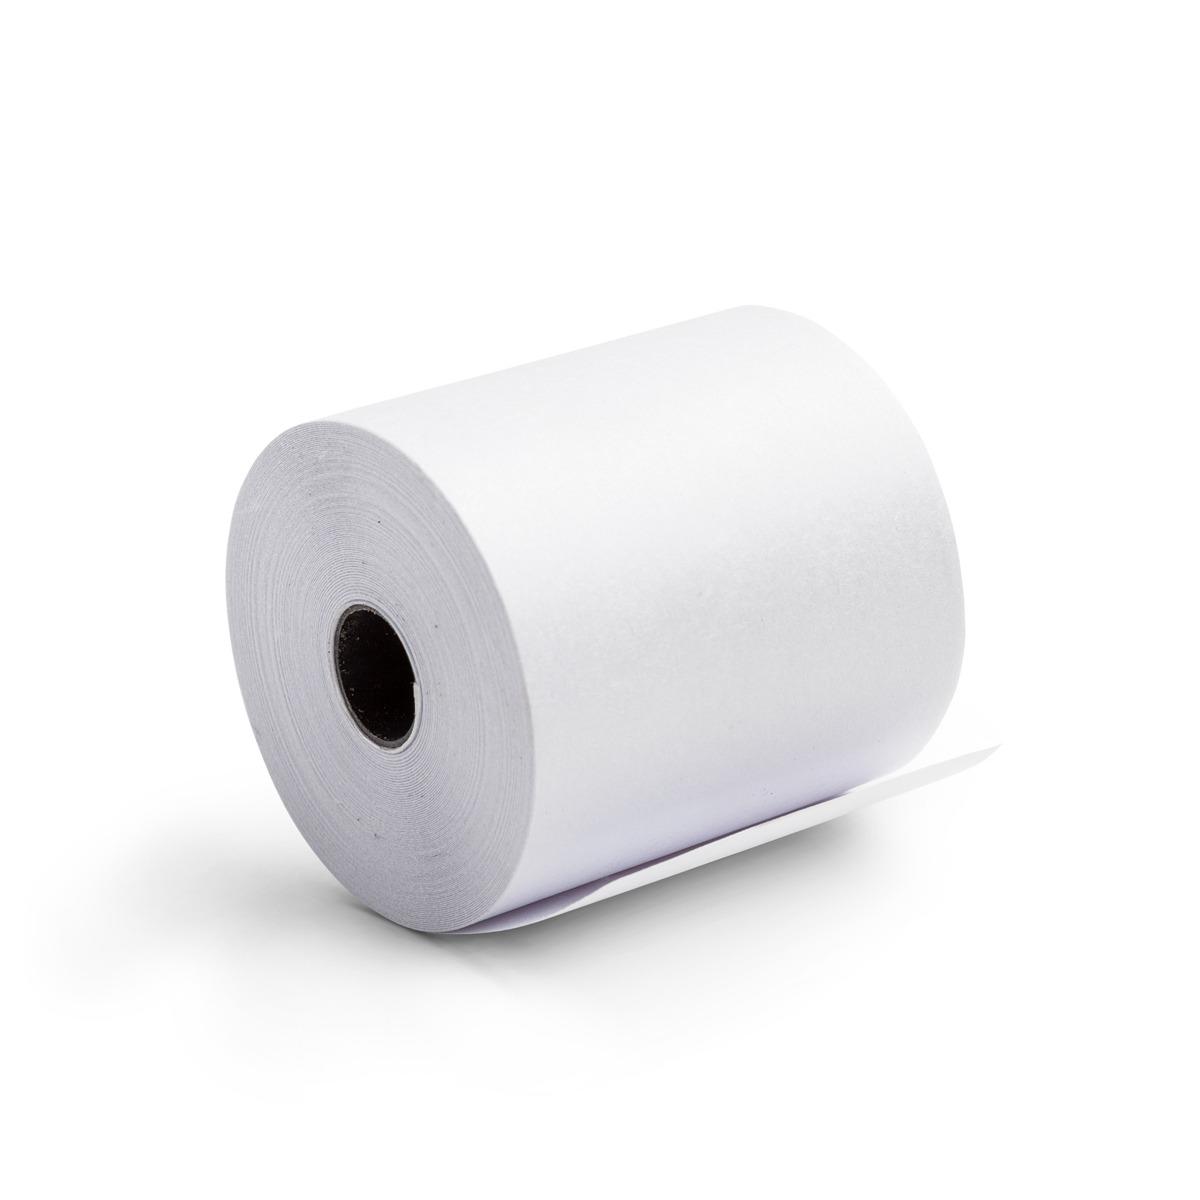 ROLLO PAPEL P/MAQ 57 MM X 20 MTS X 10 TERMICO MAUGER